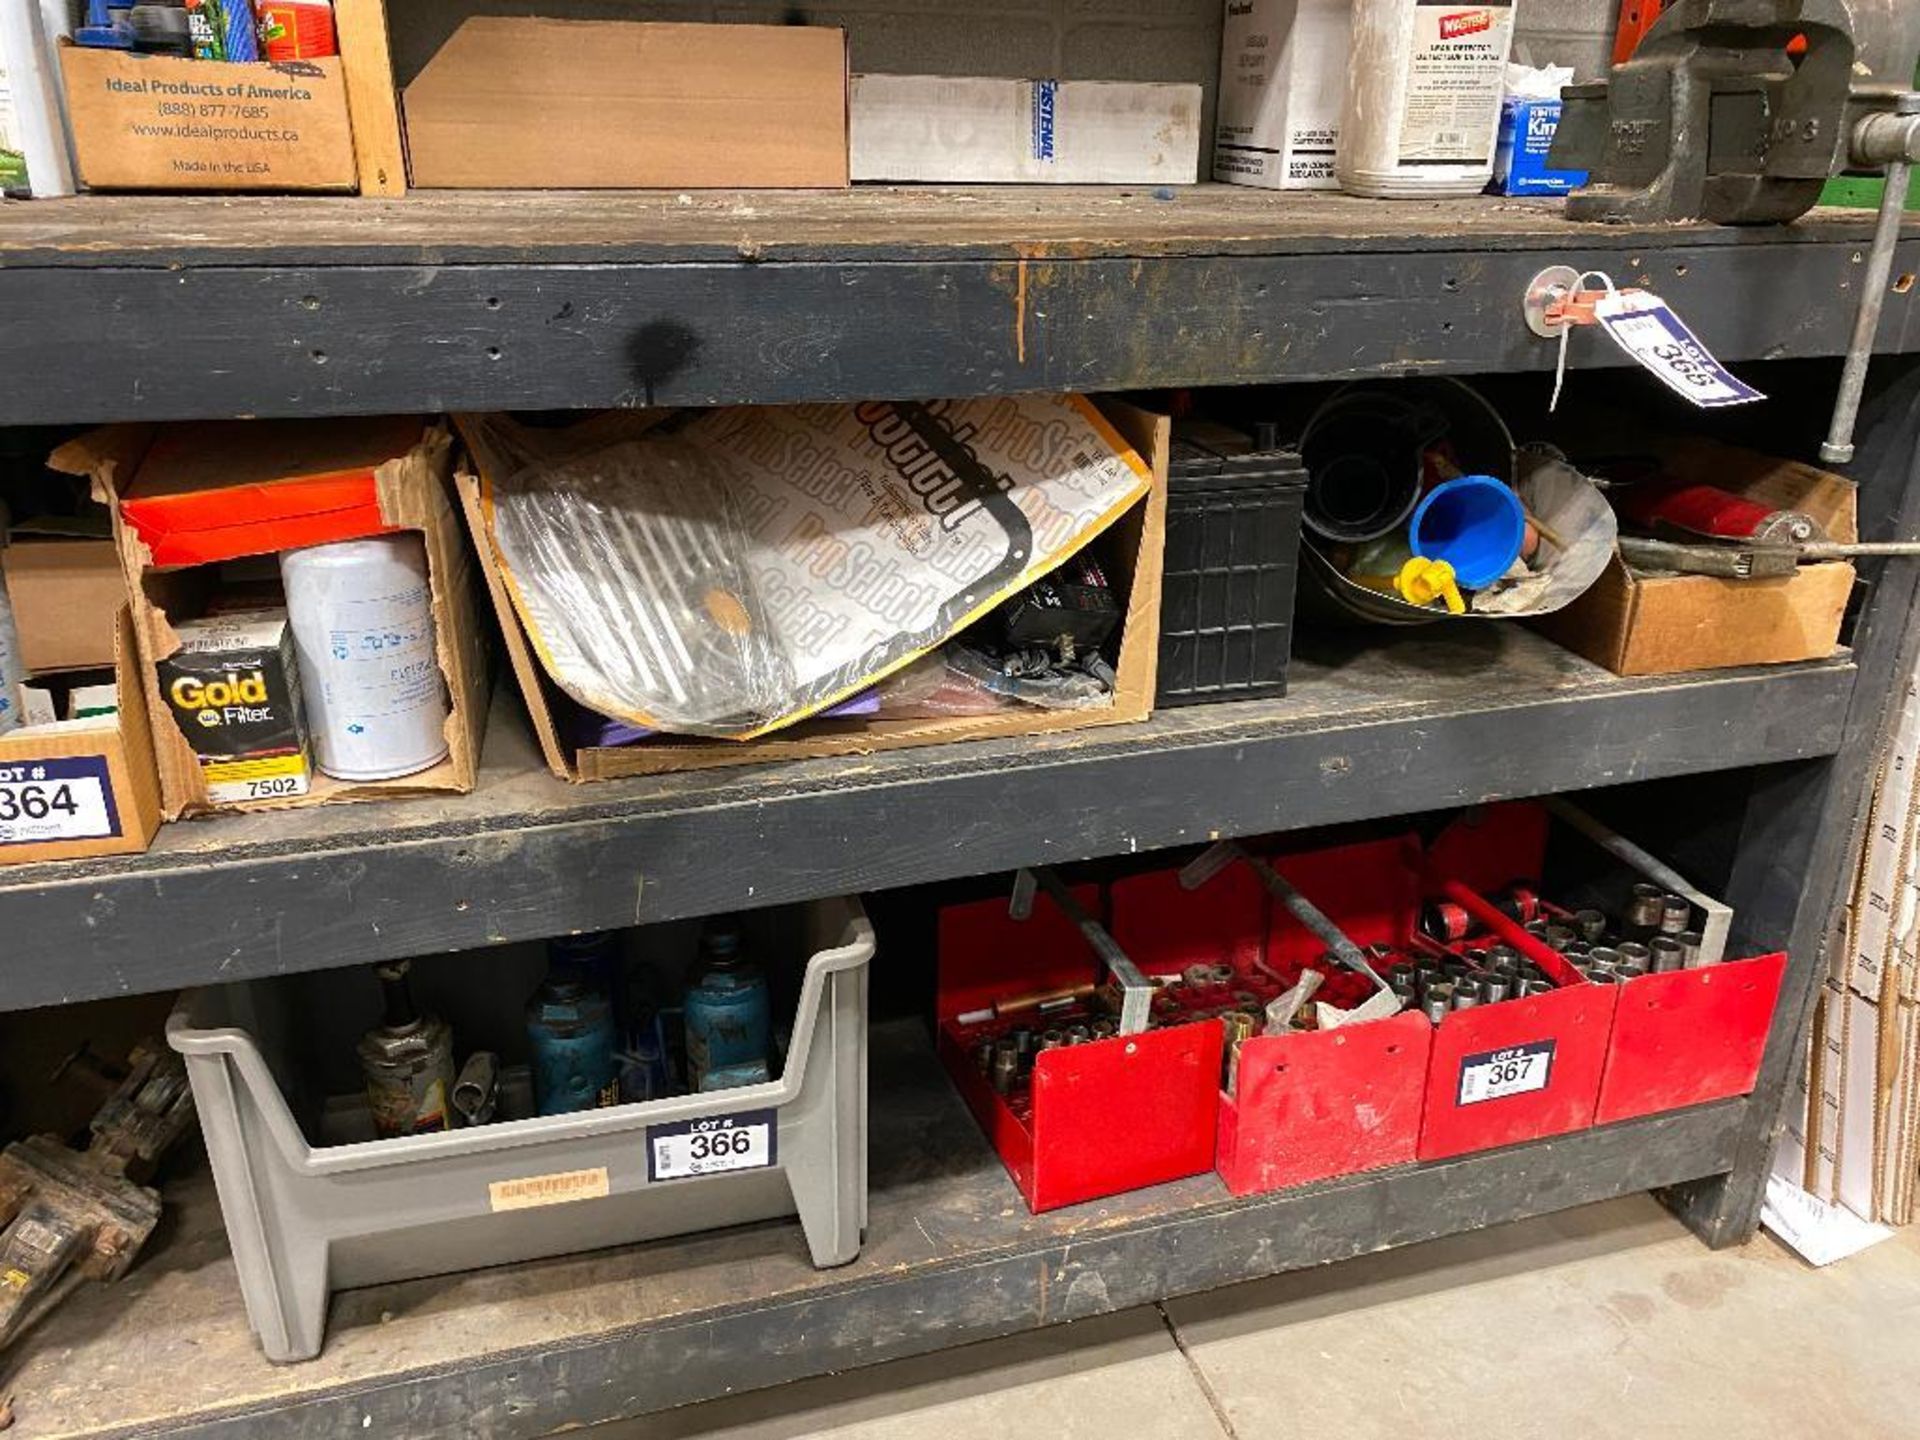 Lot of Asst. Automotive Parts including Oil, Filters, Battery, Funnels, Grease Guns, etc. - Image 2 of 2